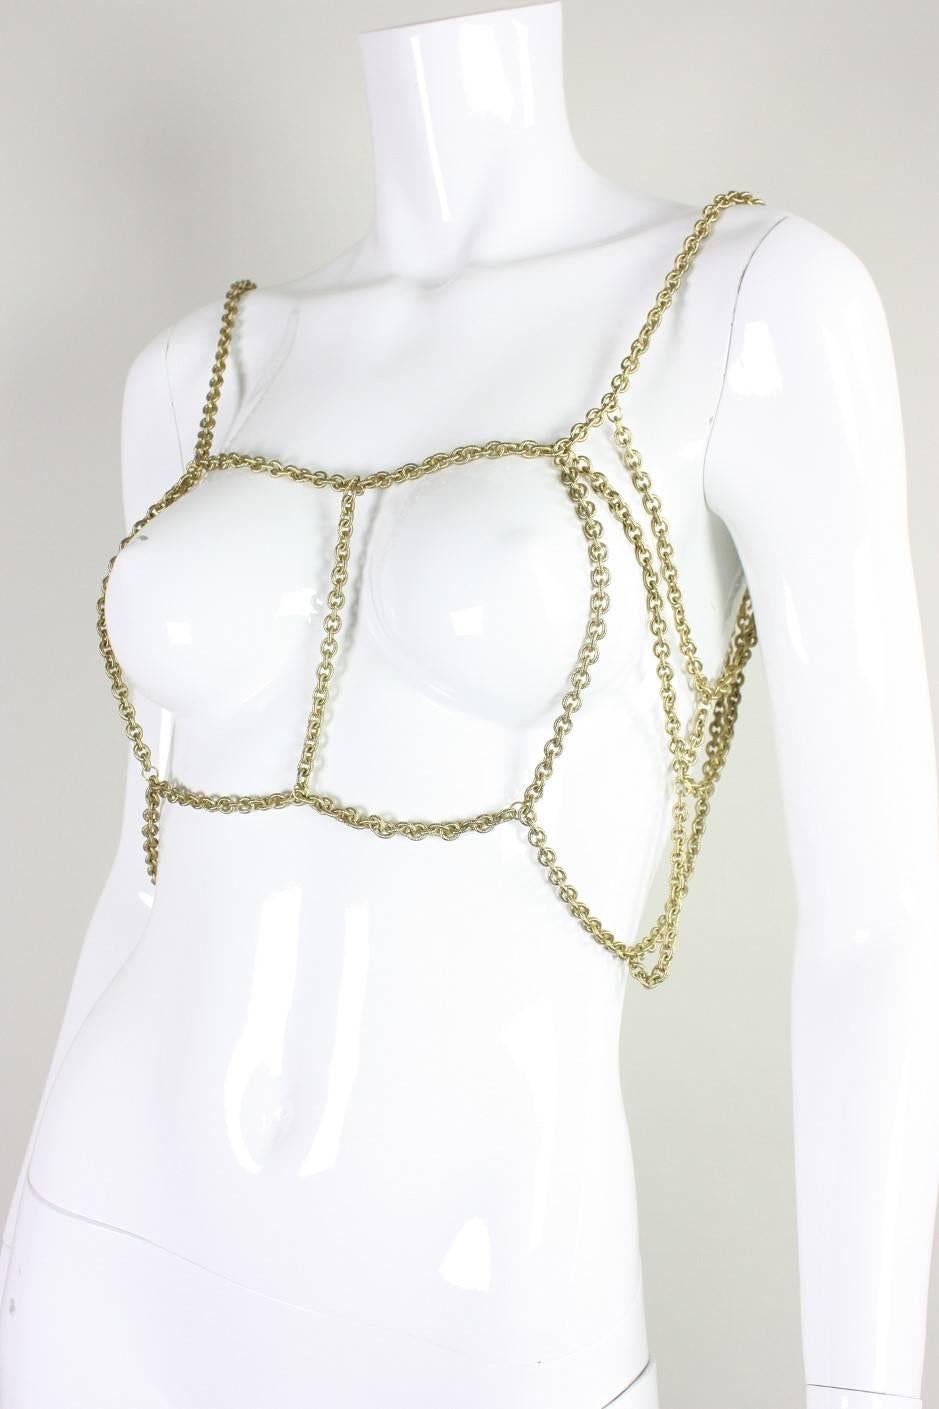 Gold-Toned Chain Body Jewelry In Excellent Condition For Sale In Los Angeles, CA